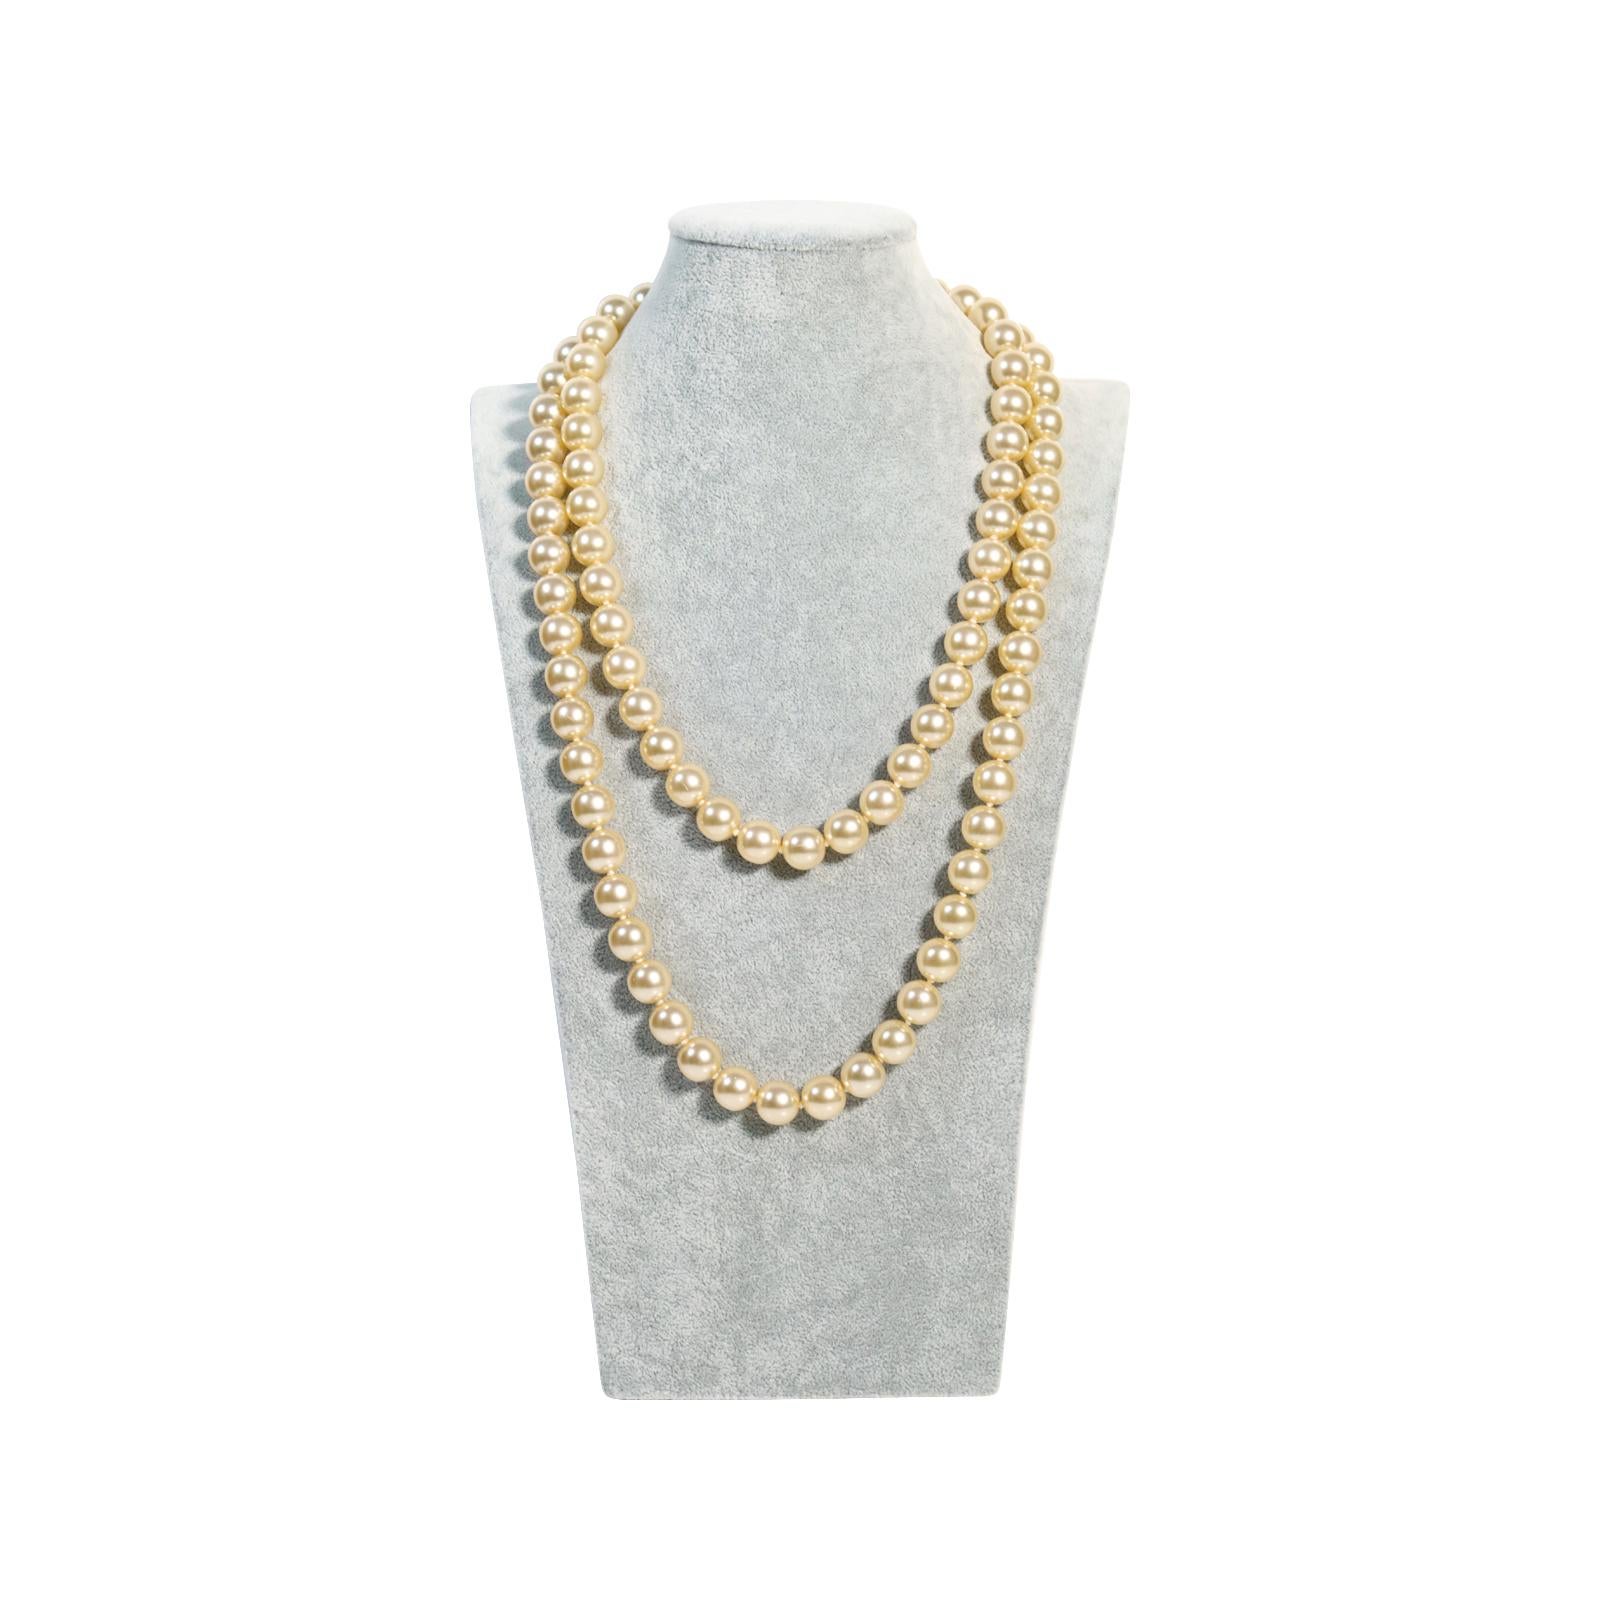 Vintage French Single Strand of Faux Pearls Necklace Circa 1980s For Sale 3